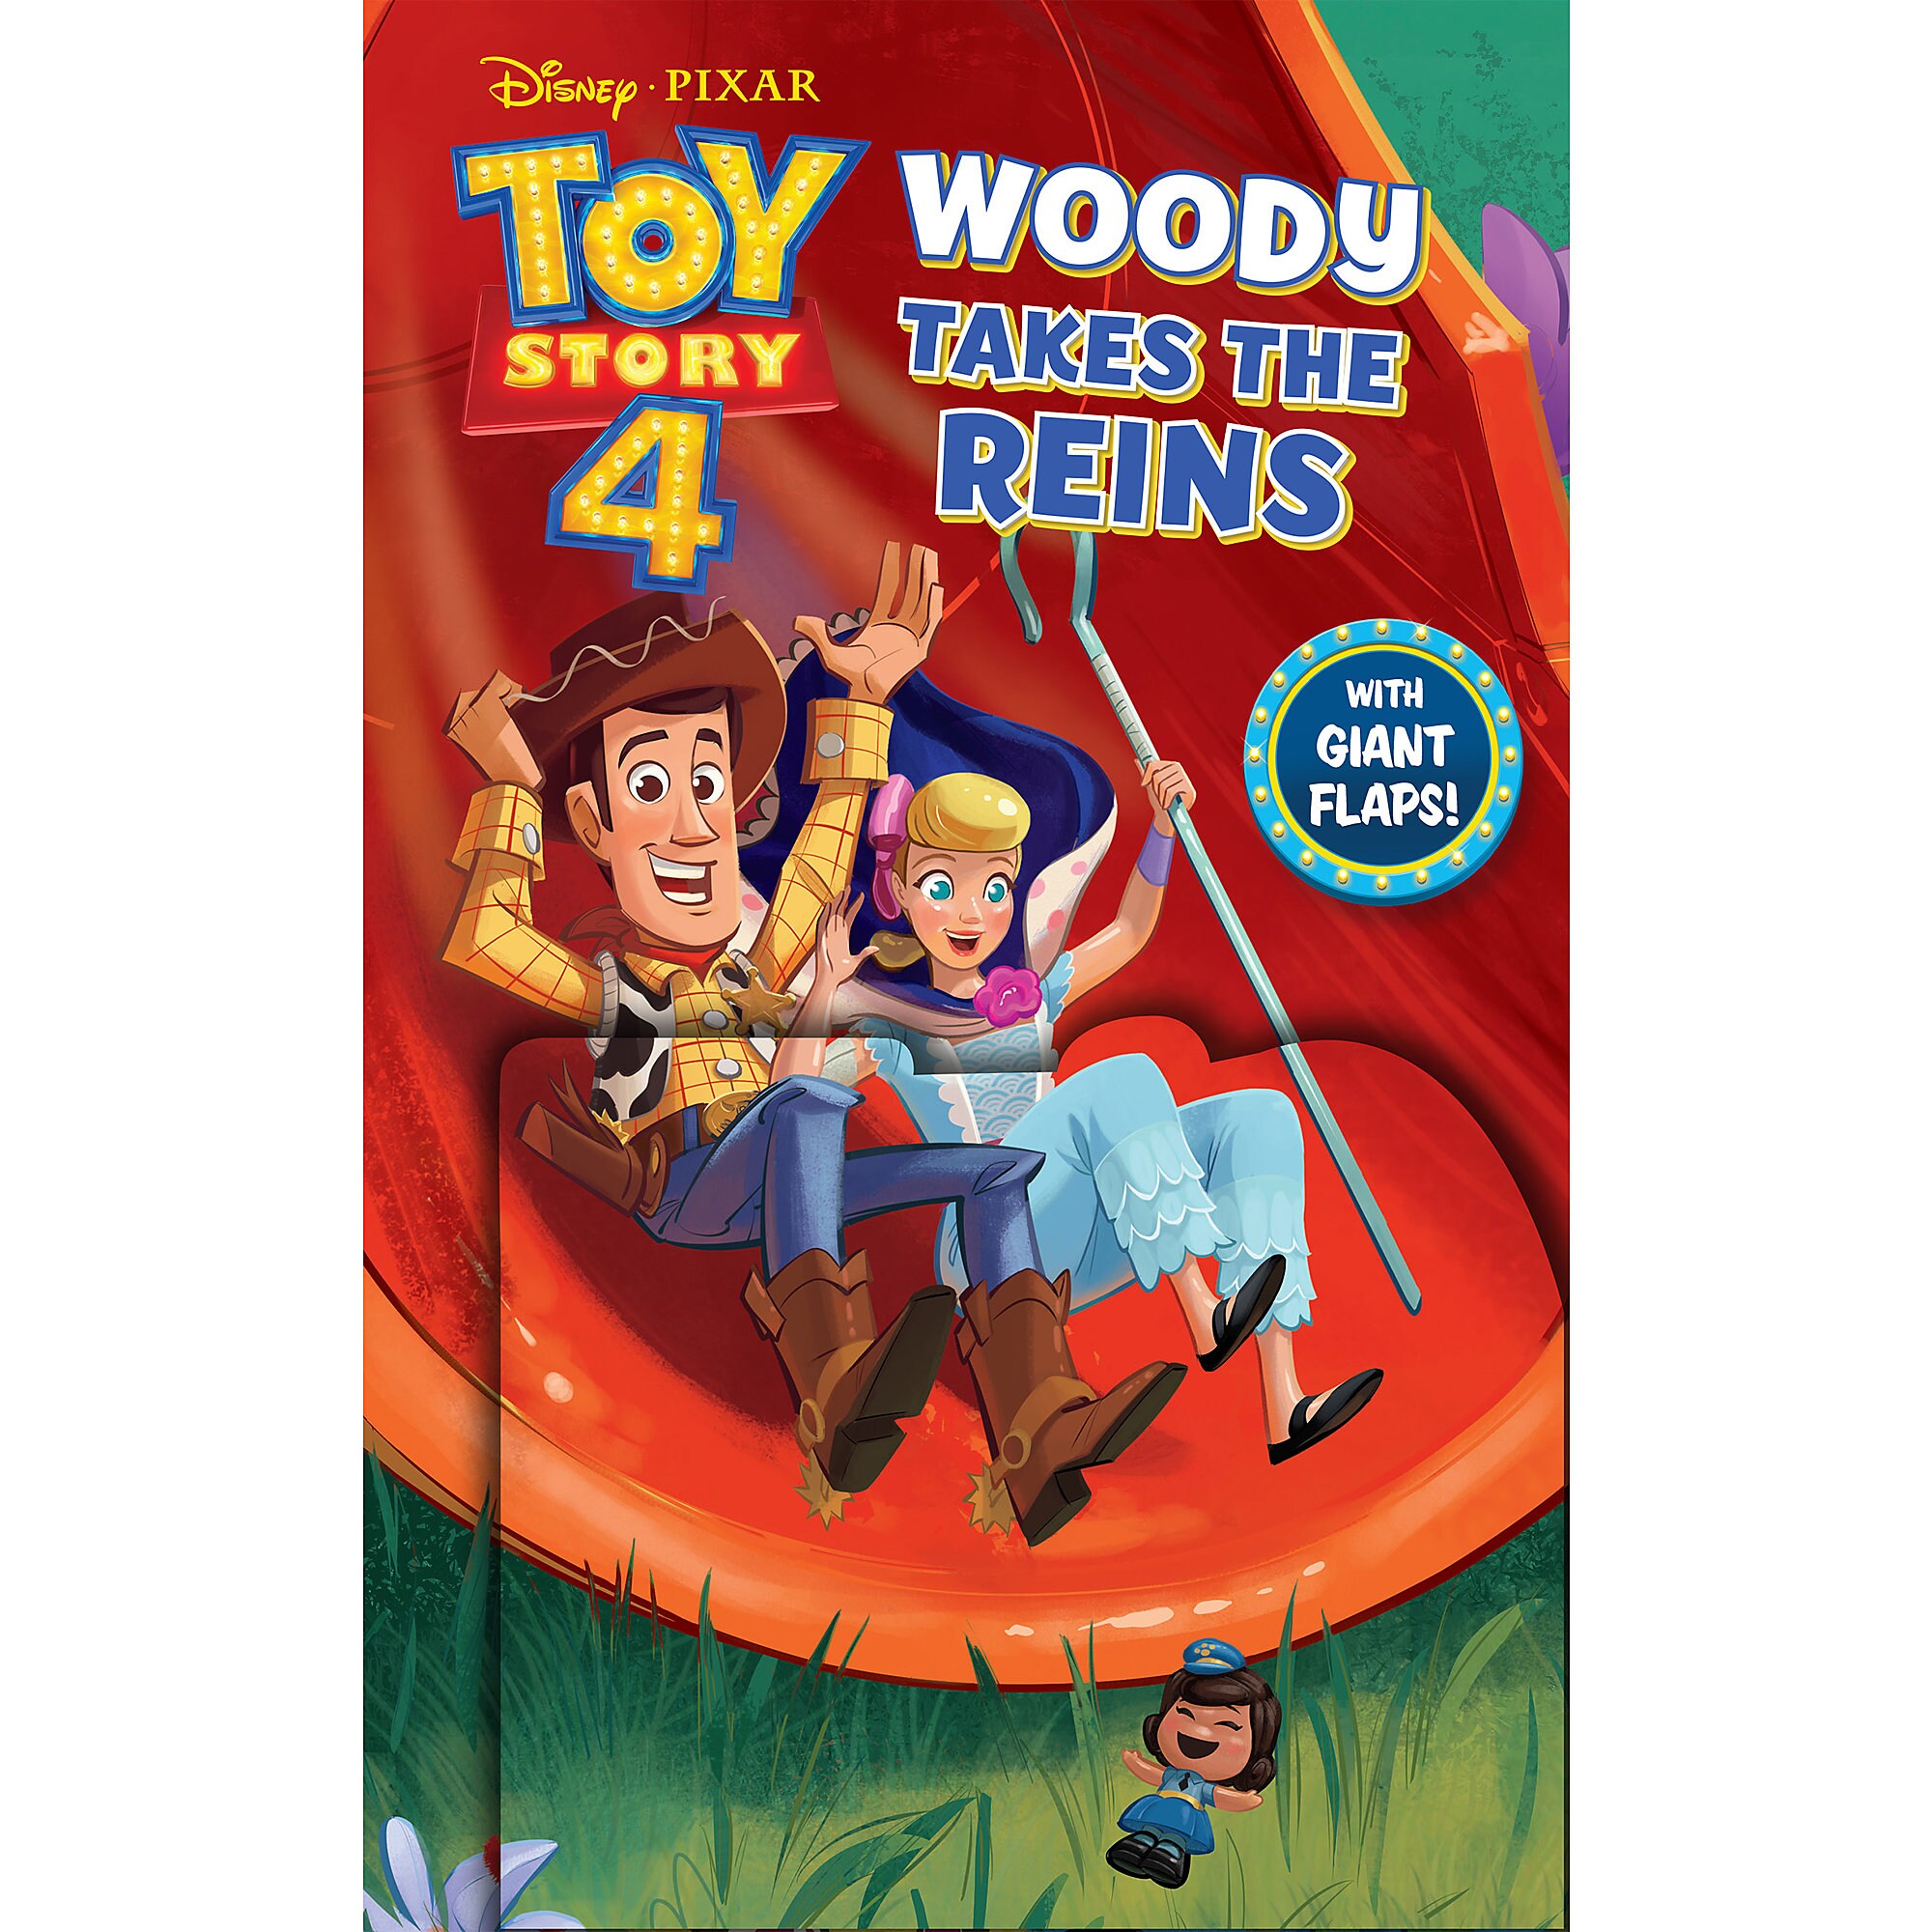 Toy Story 4: Woody Takes the Reins Book